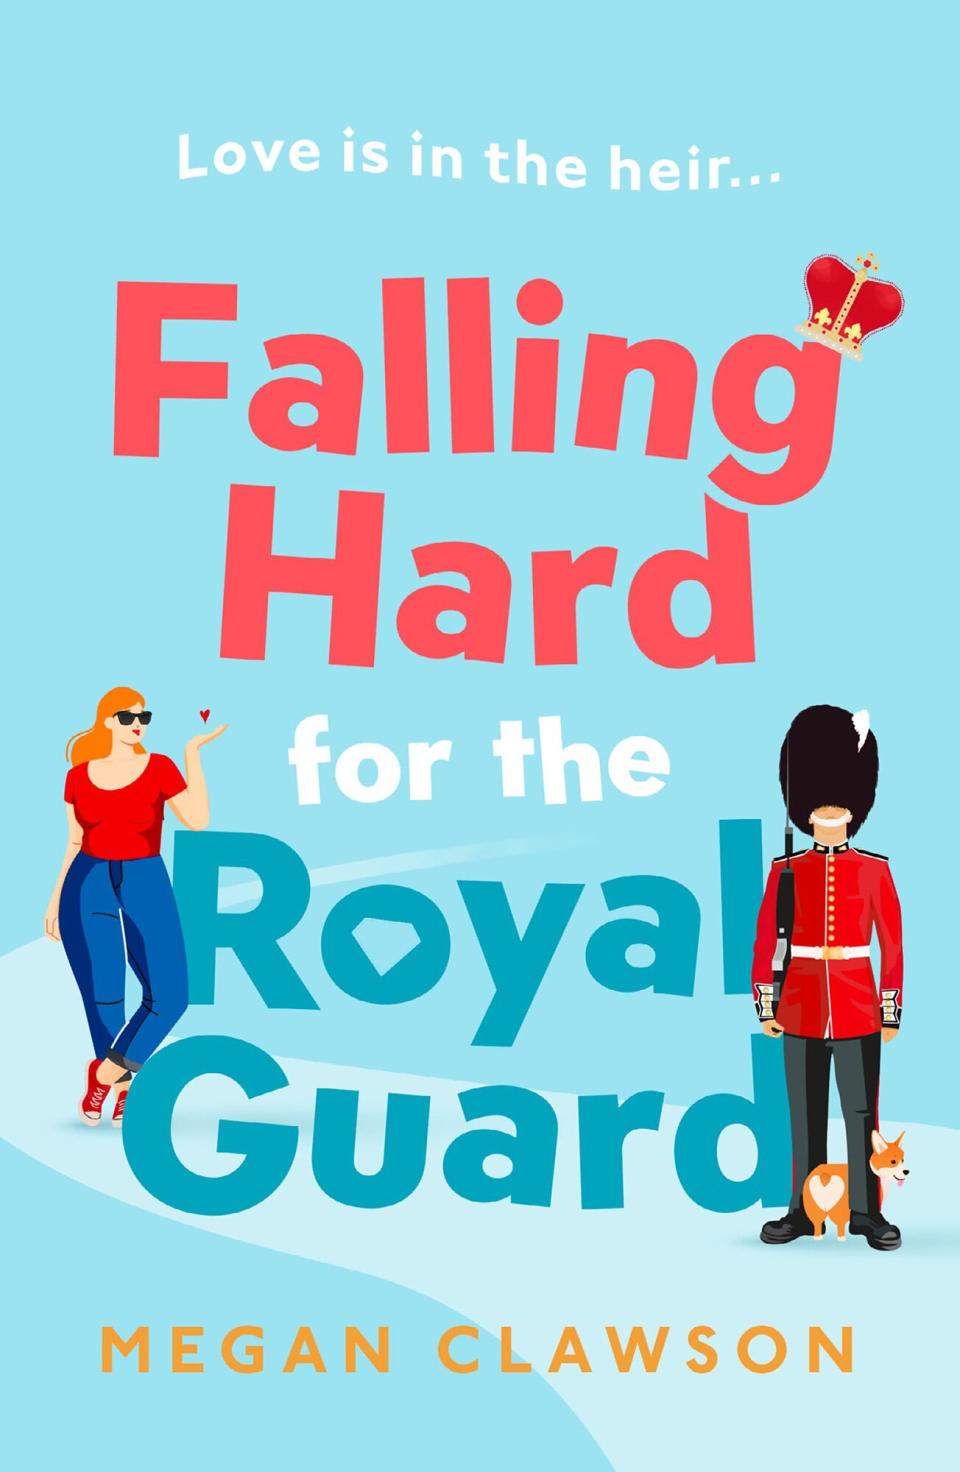 Falling Hard for the Royal Guard: A new and royally good debut rom com for Spring 2023, perfect for anyone who likes London, laughing out loud and love Paperback – May 2, 2023 by Megan Clawson